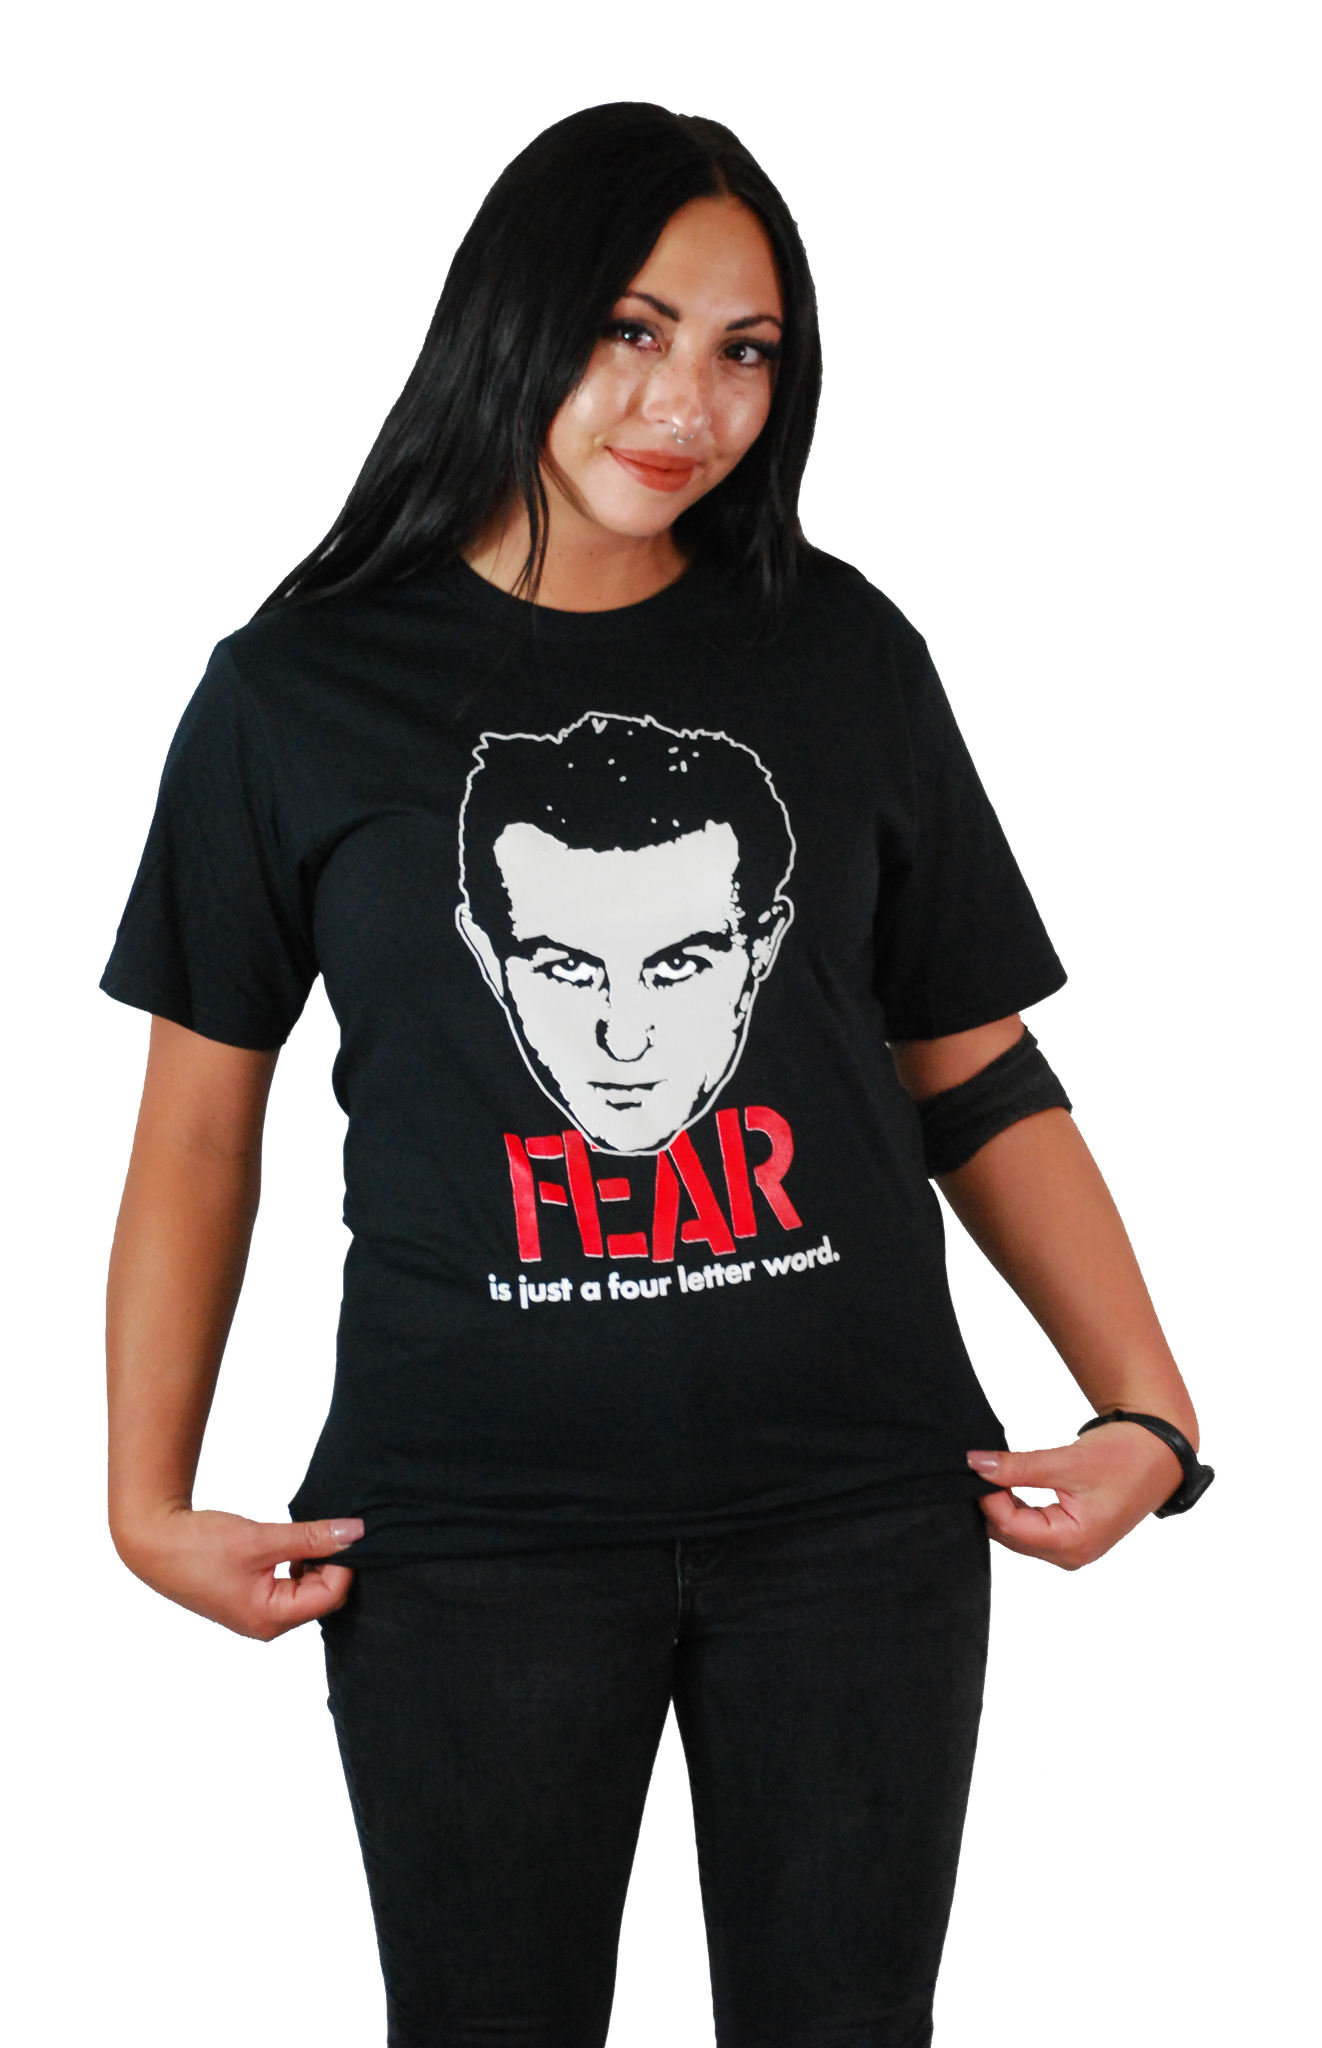 FEAR "IS JUST A FOUR LETTER WORD" T-SHIRT